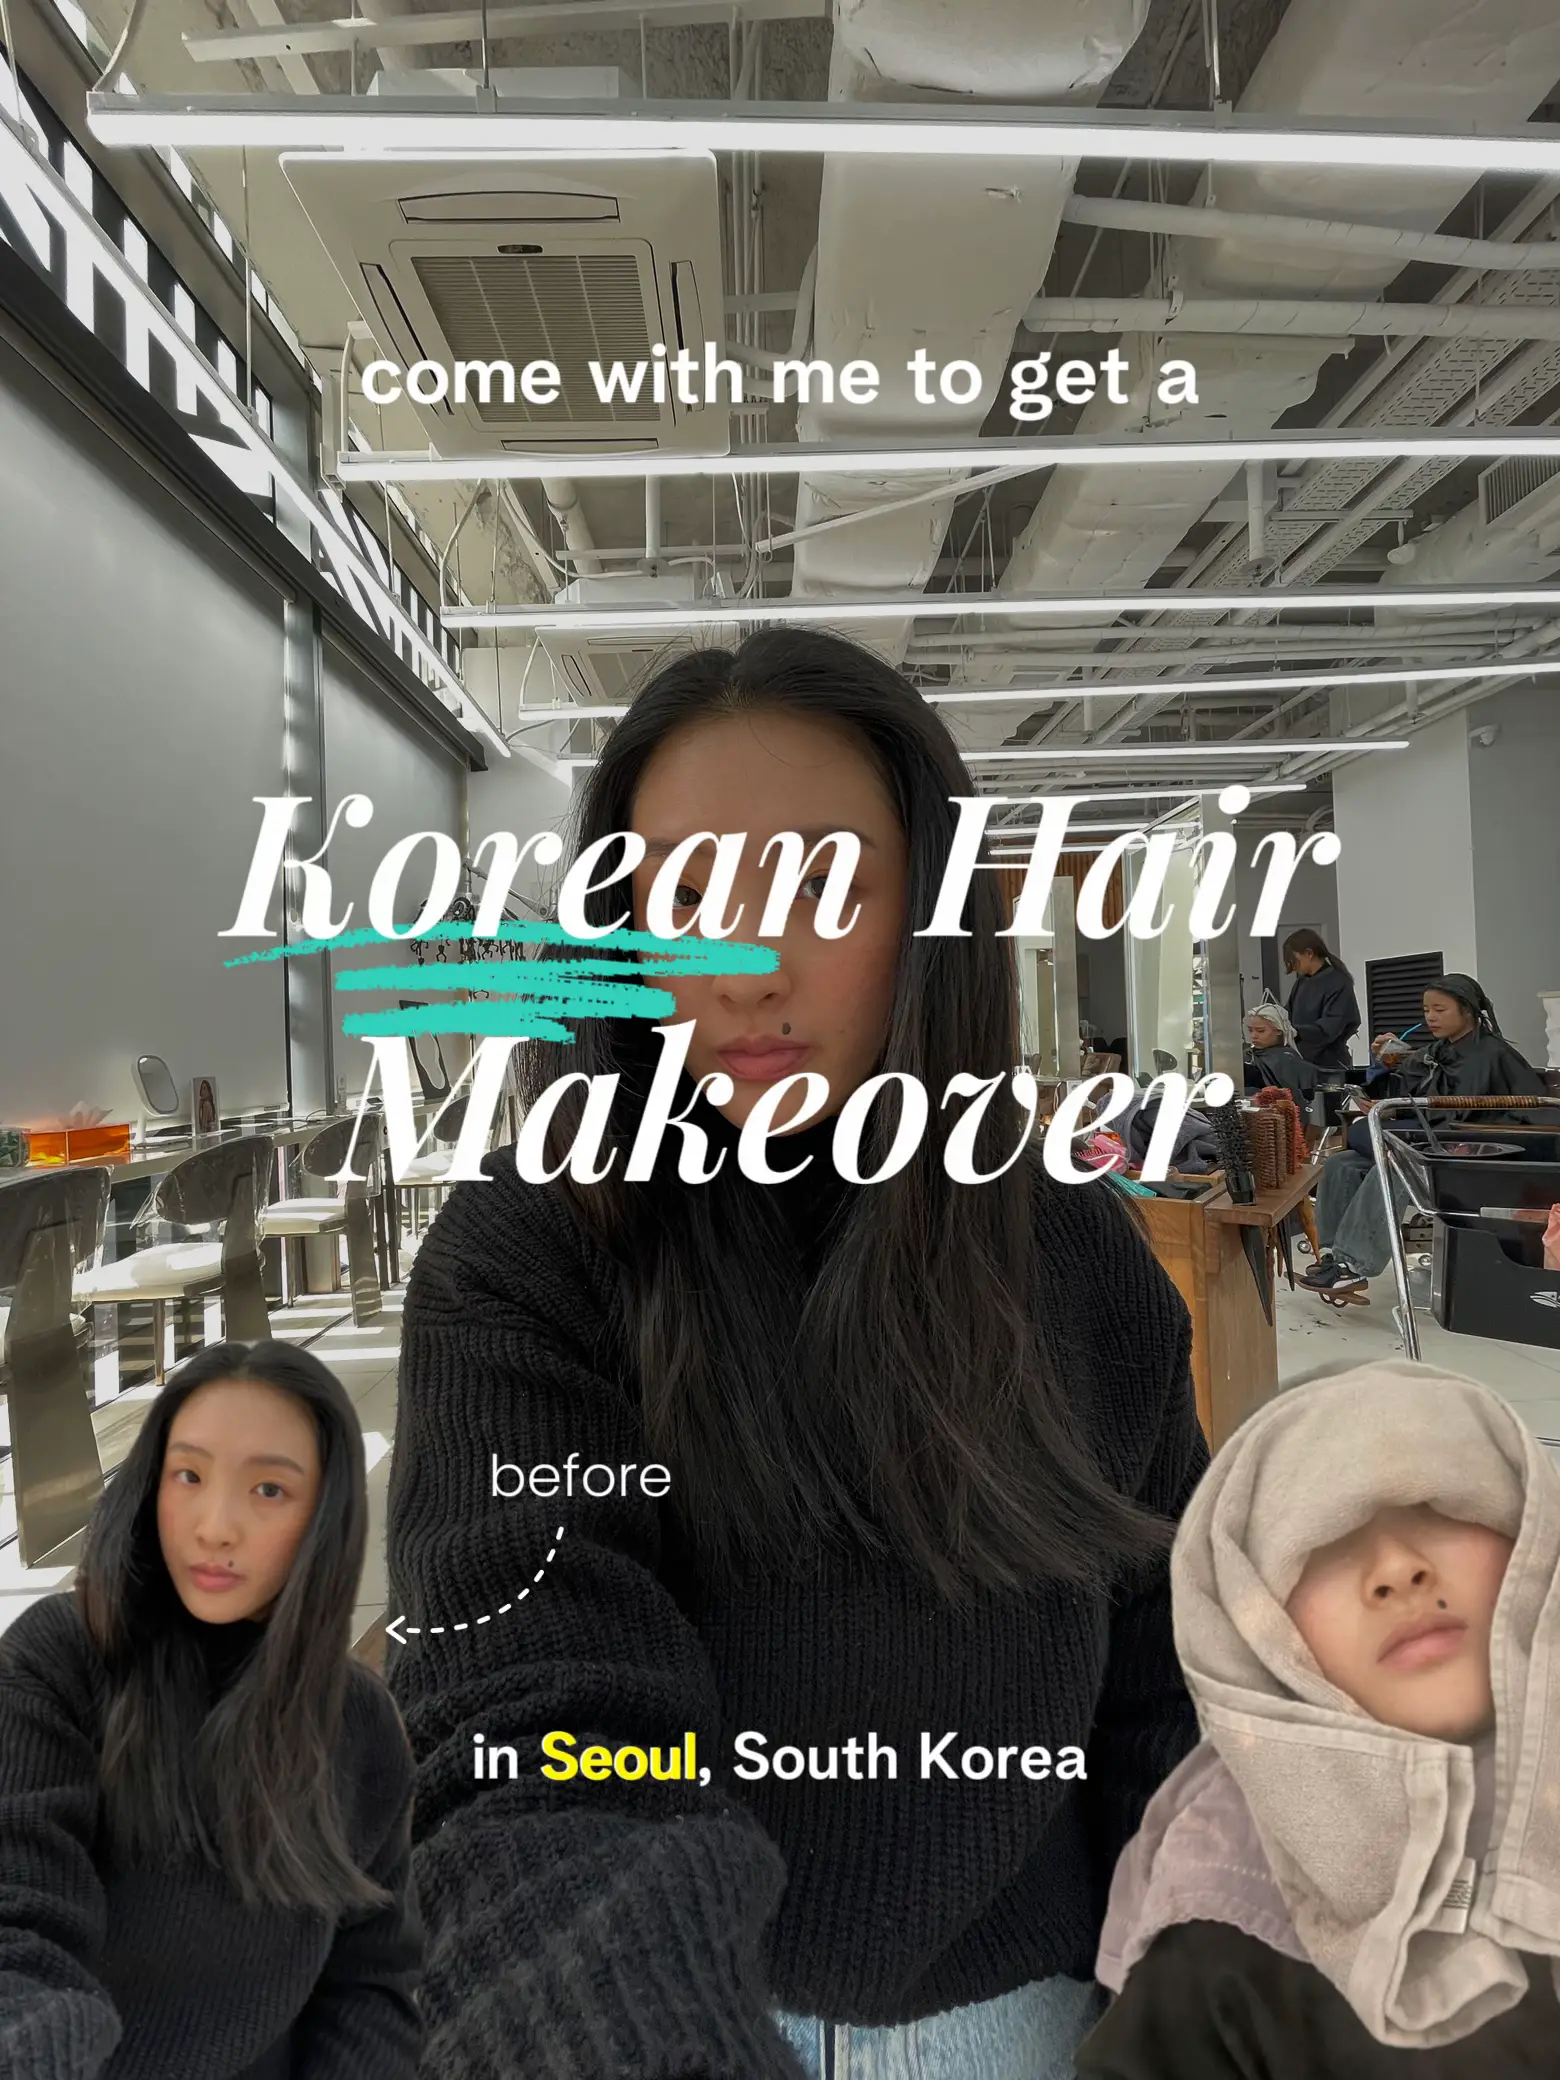 Getting my hair done in Seoul — worth it? 🇰🇷💸💇‍♀️'s images(0)